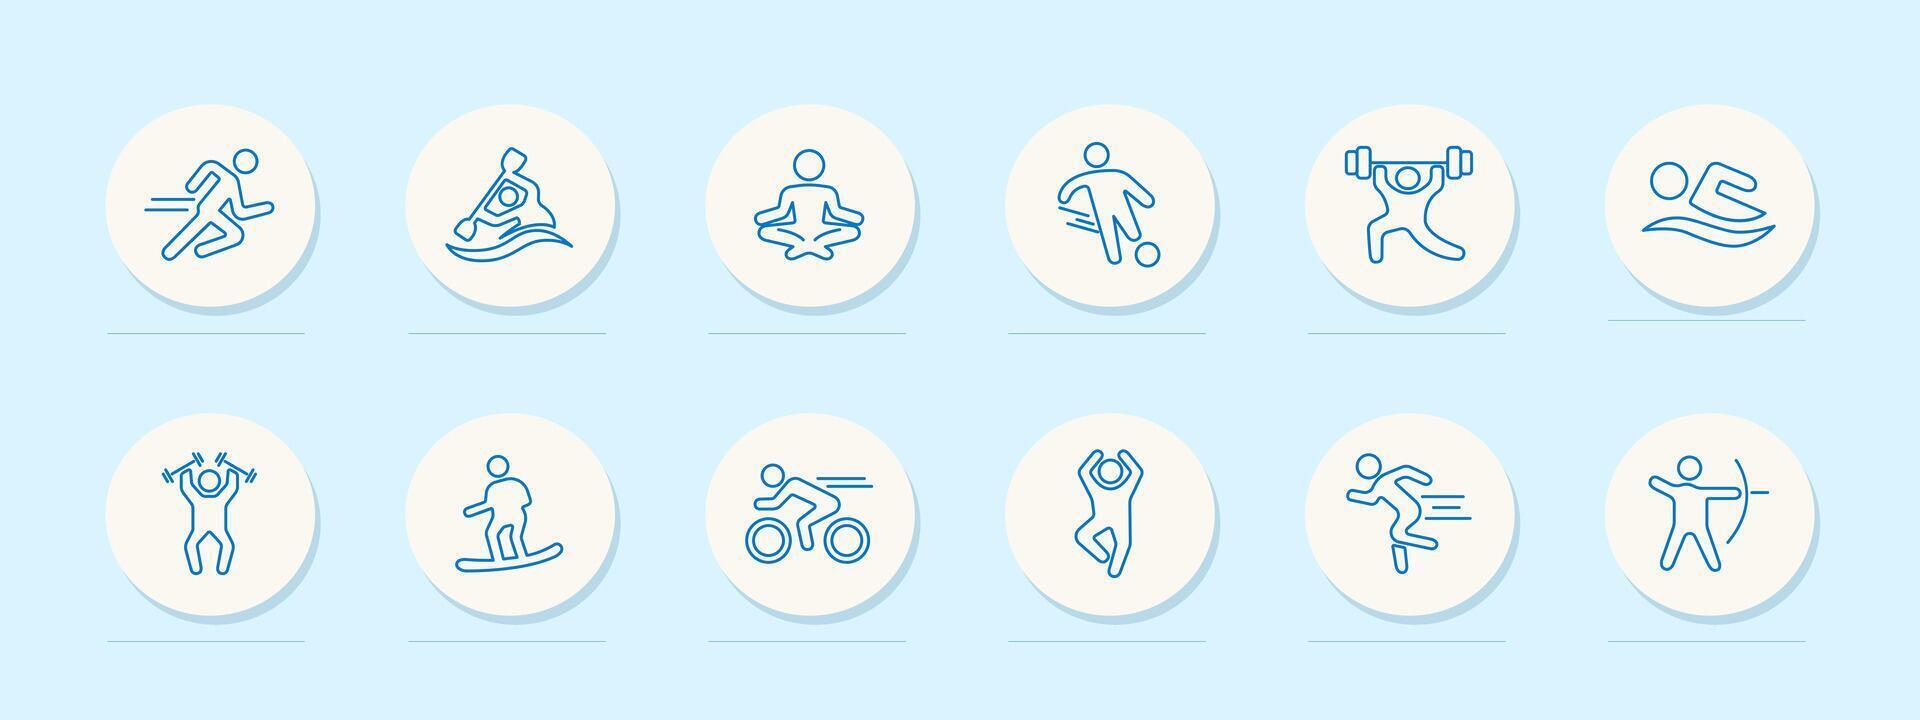 Useful hobby set icon. Archery, swimming, lifting weights, meditation, dancing, cycling, running, health care, outdoor activities, sports, blue. Healthy lifestyle concept. line icon. vector